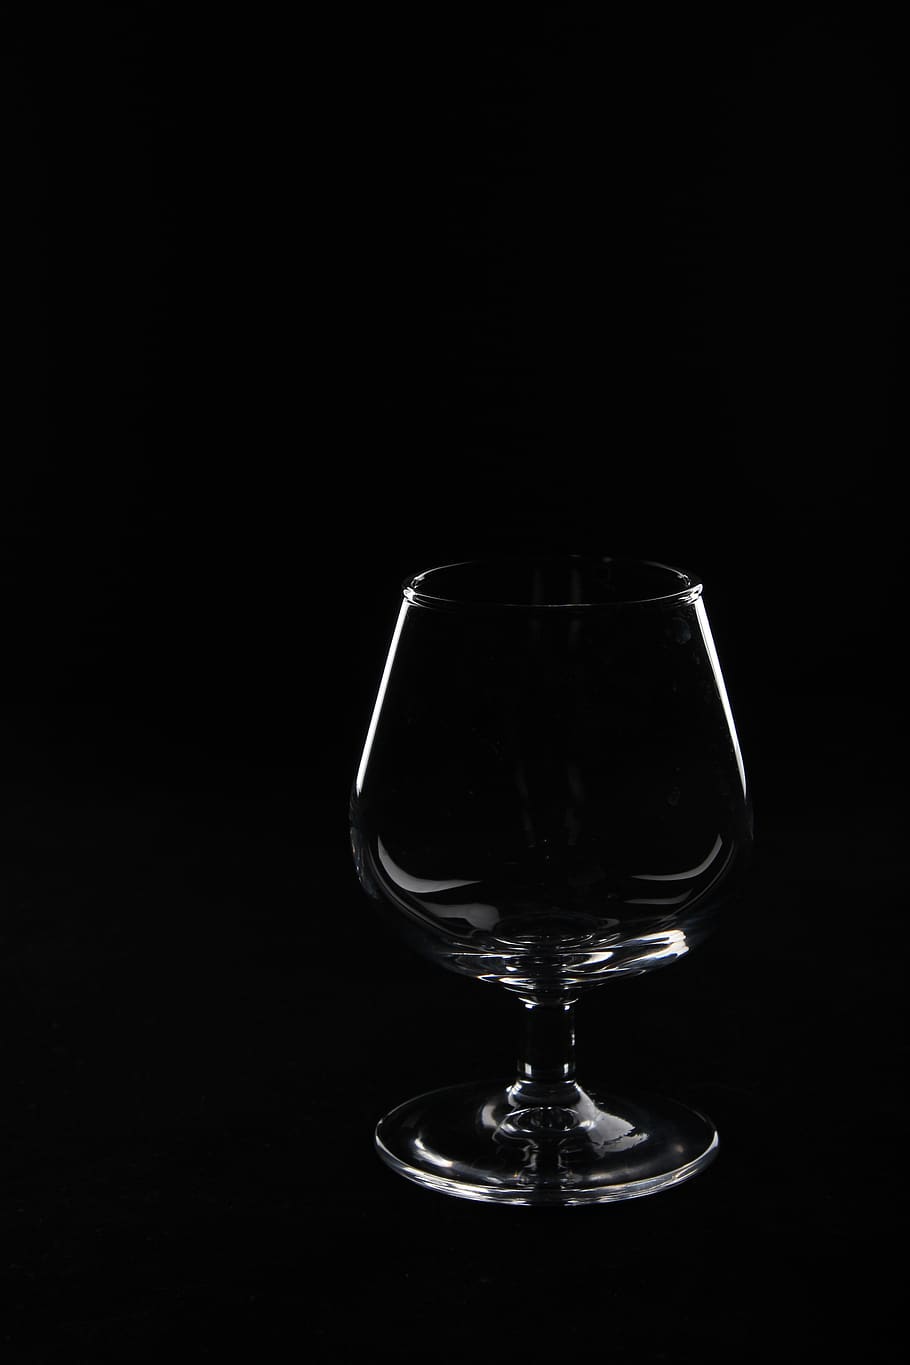 wine, glass container, drink, alcoholic beverage, darkness, glass, cognac, black background, studio shot, food and drink